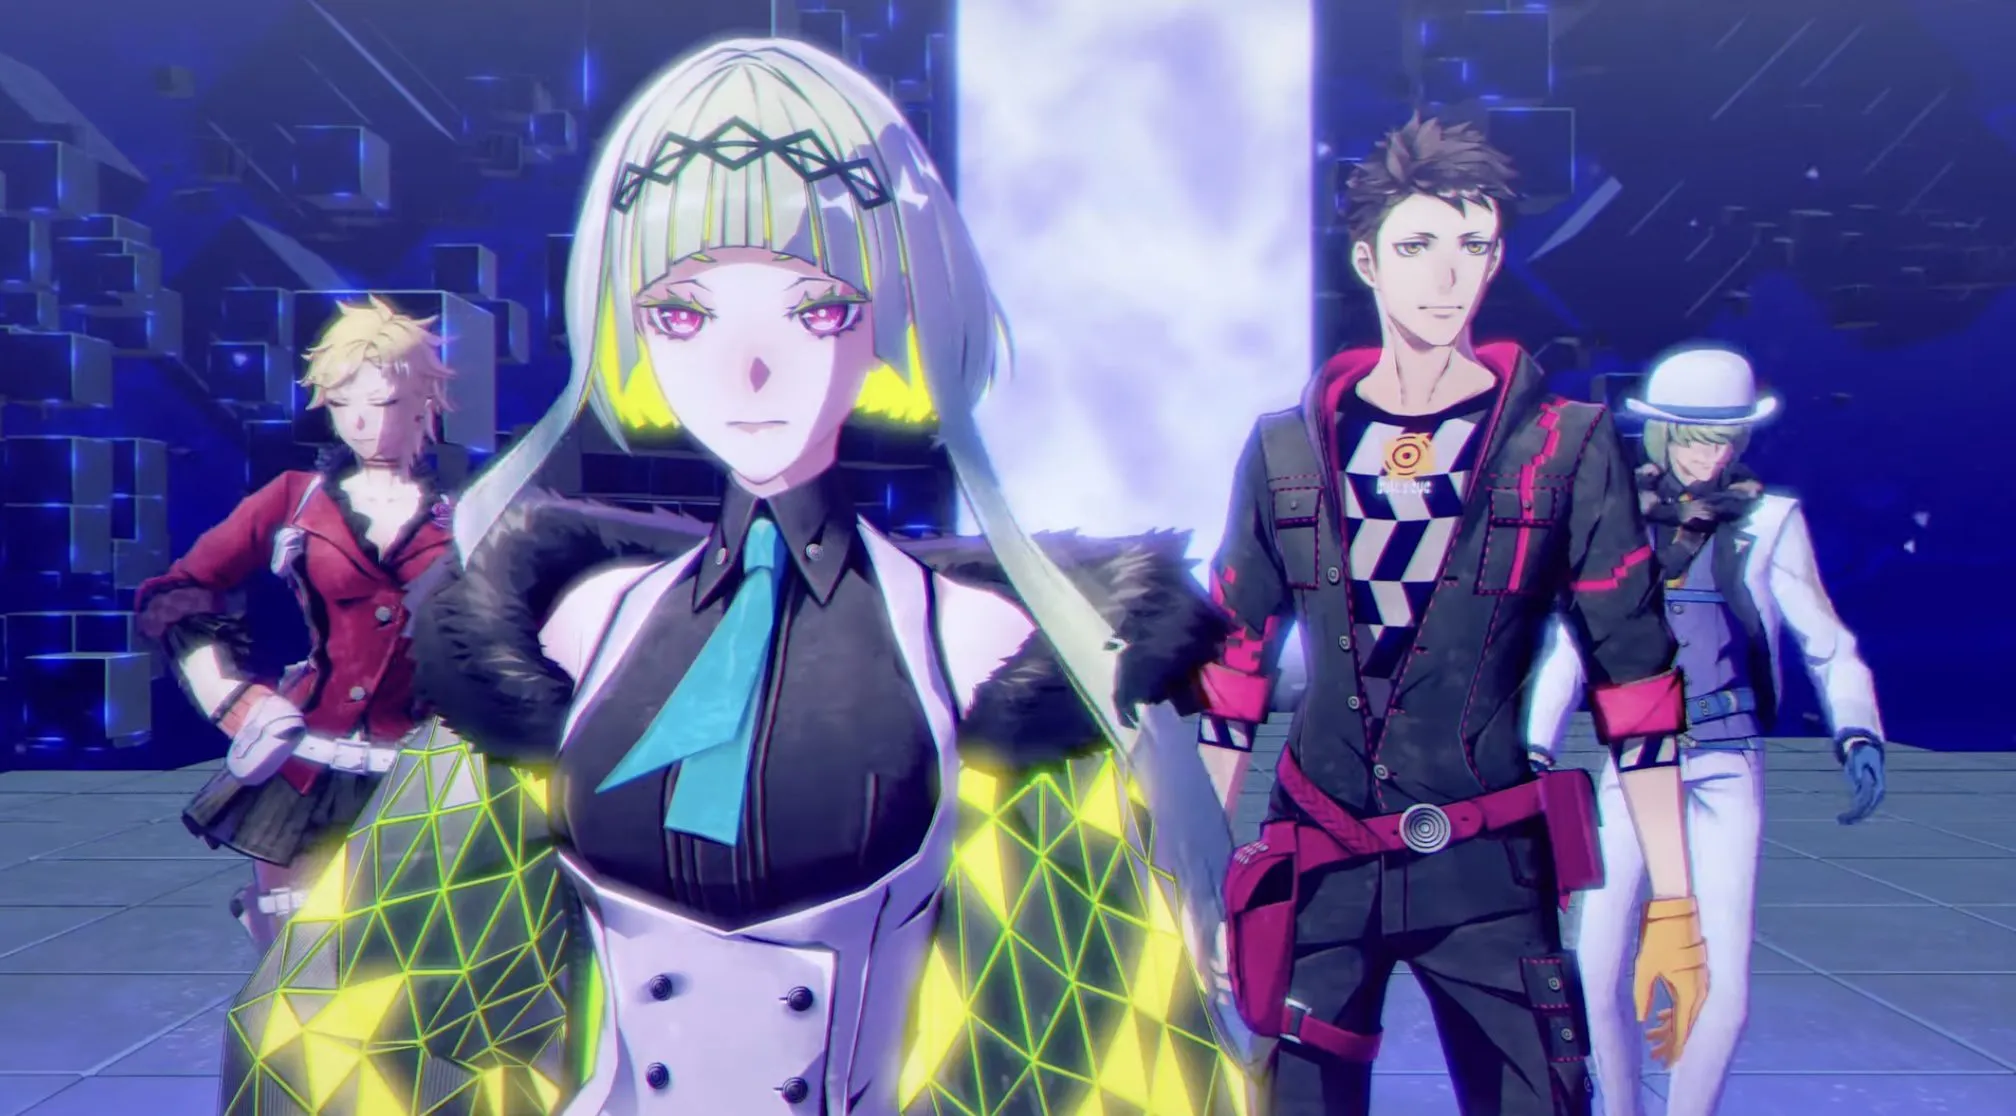 The persona 5 costumes coming to Soul Hackers 2! So hyped for the